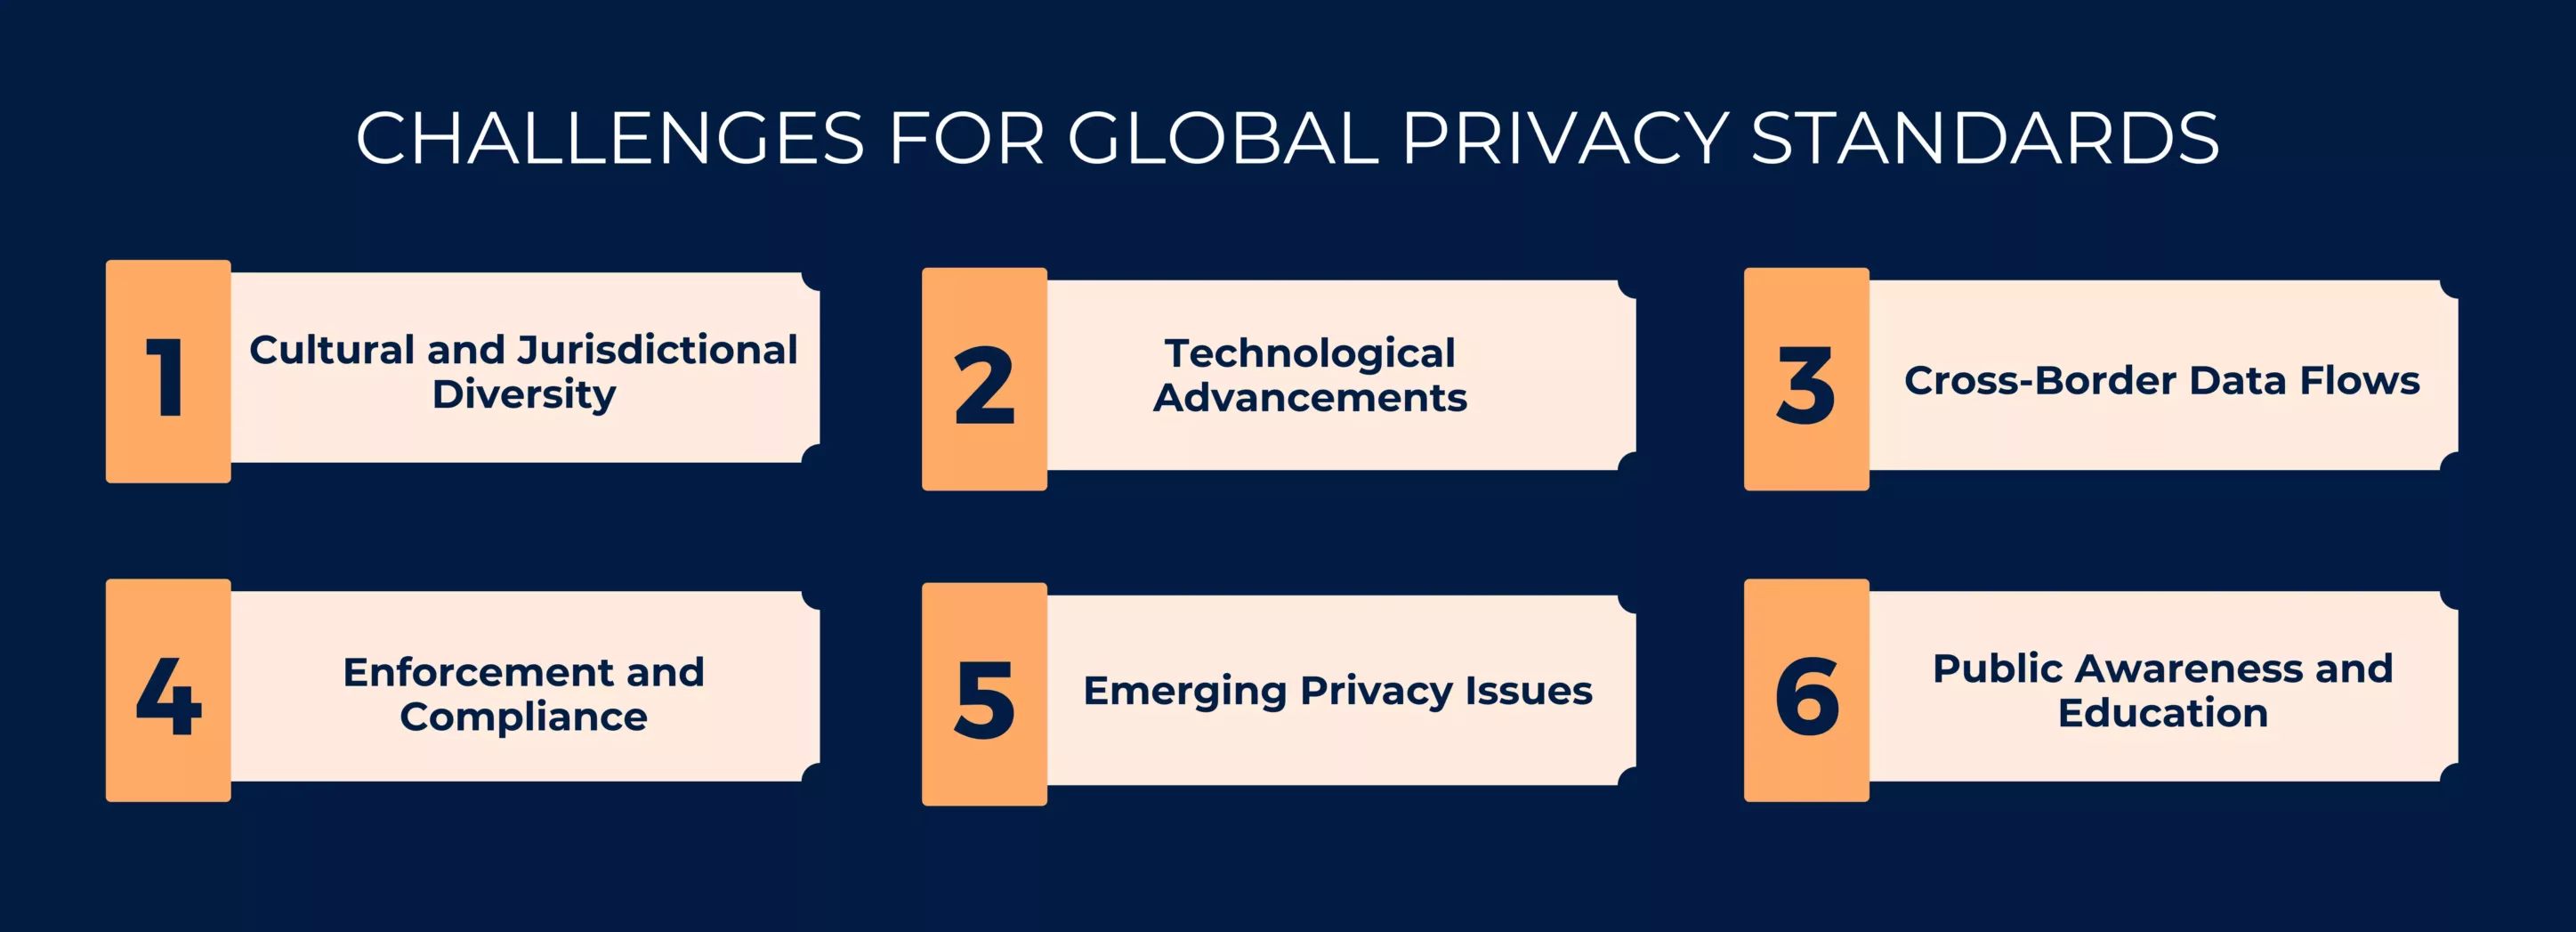 Challenges for Global privacy standards